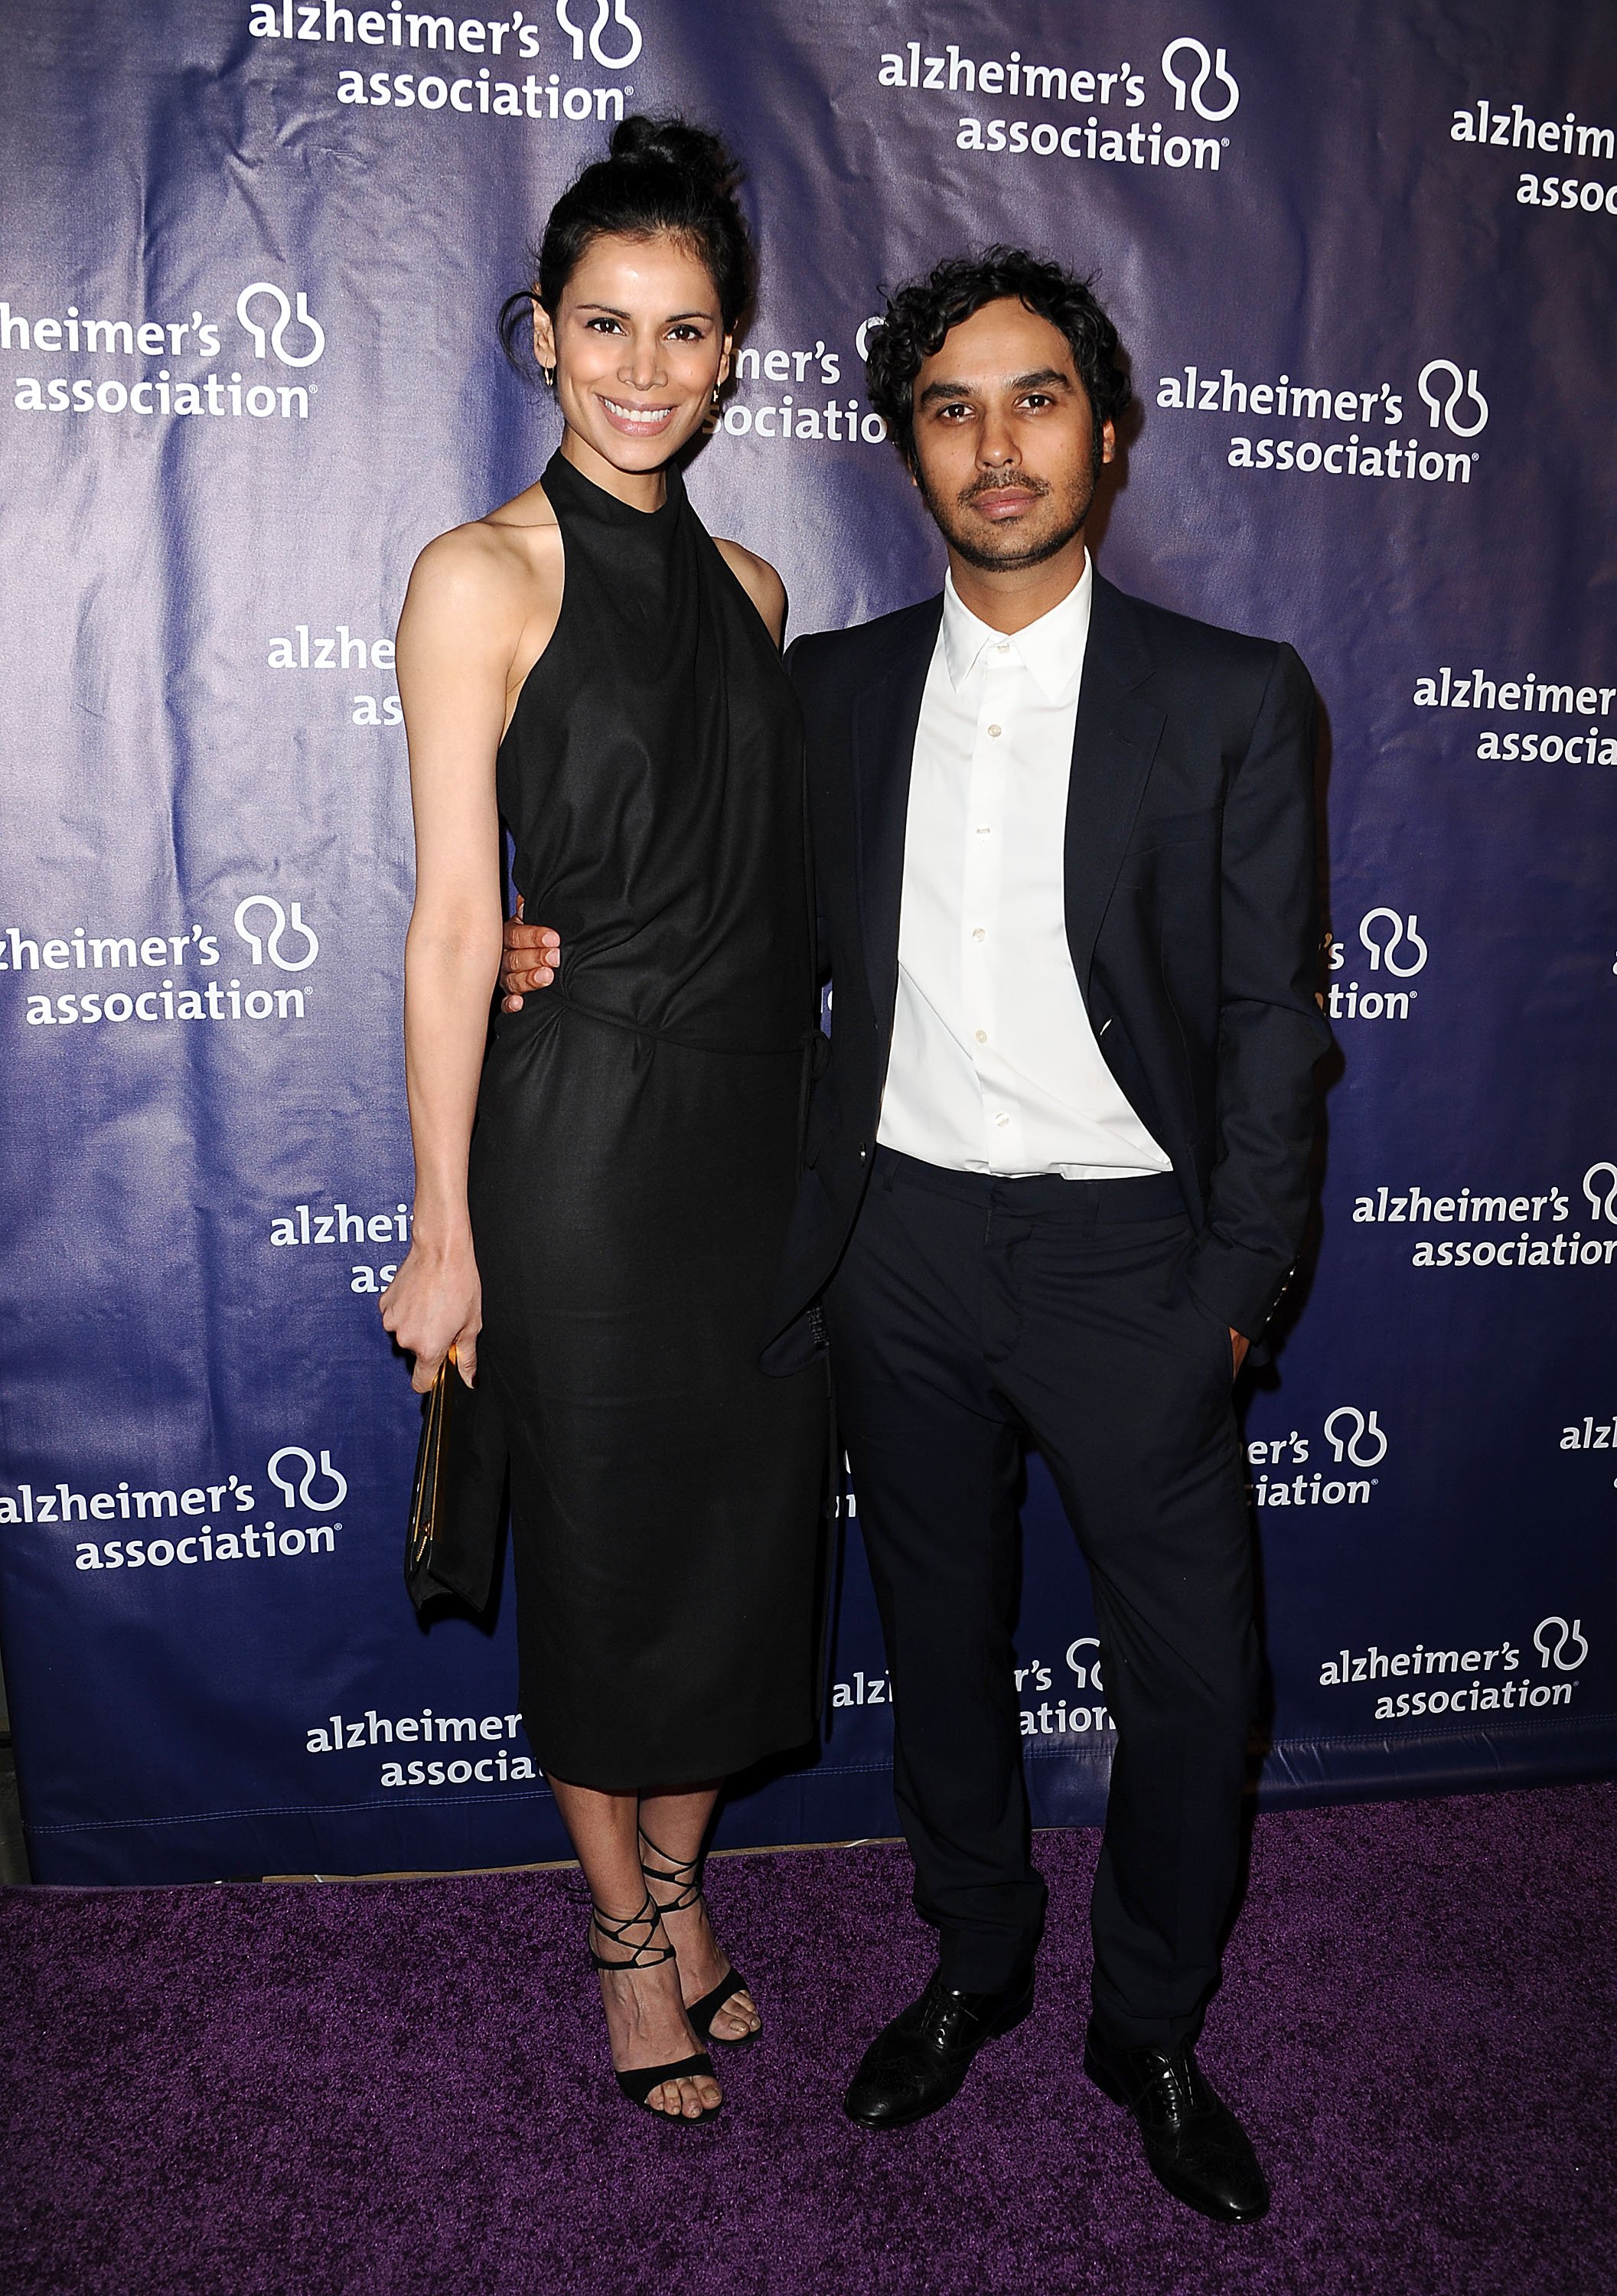 Kunal Nayyar and his wife, Neha Kapur, at the 2016 Alzheimer's Association's "A Night At Sardi's" in Beverly Hills. | Source: Getty Images